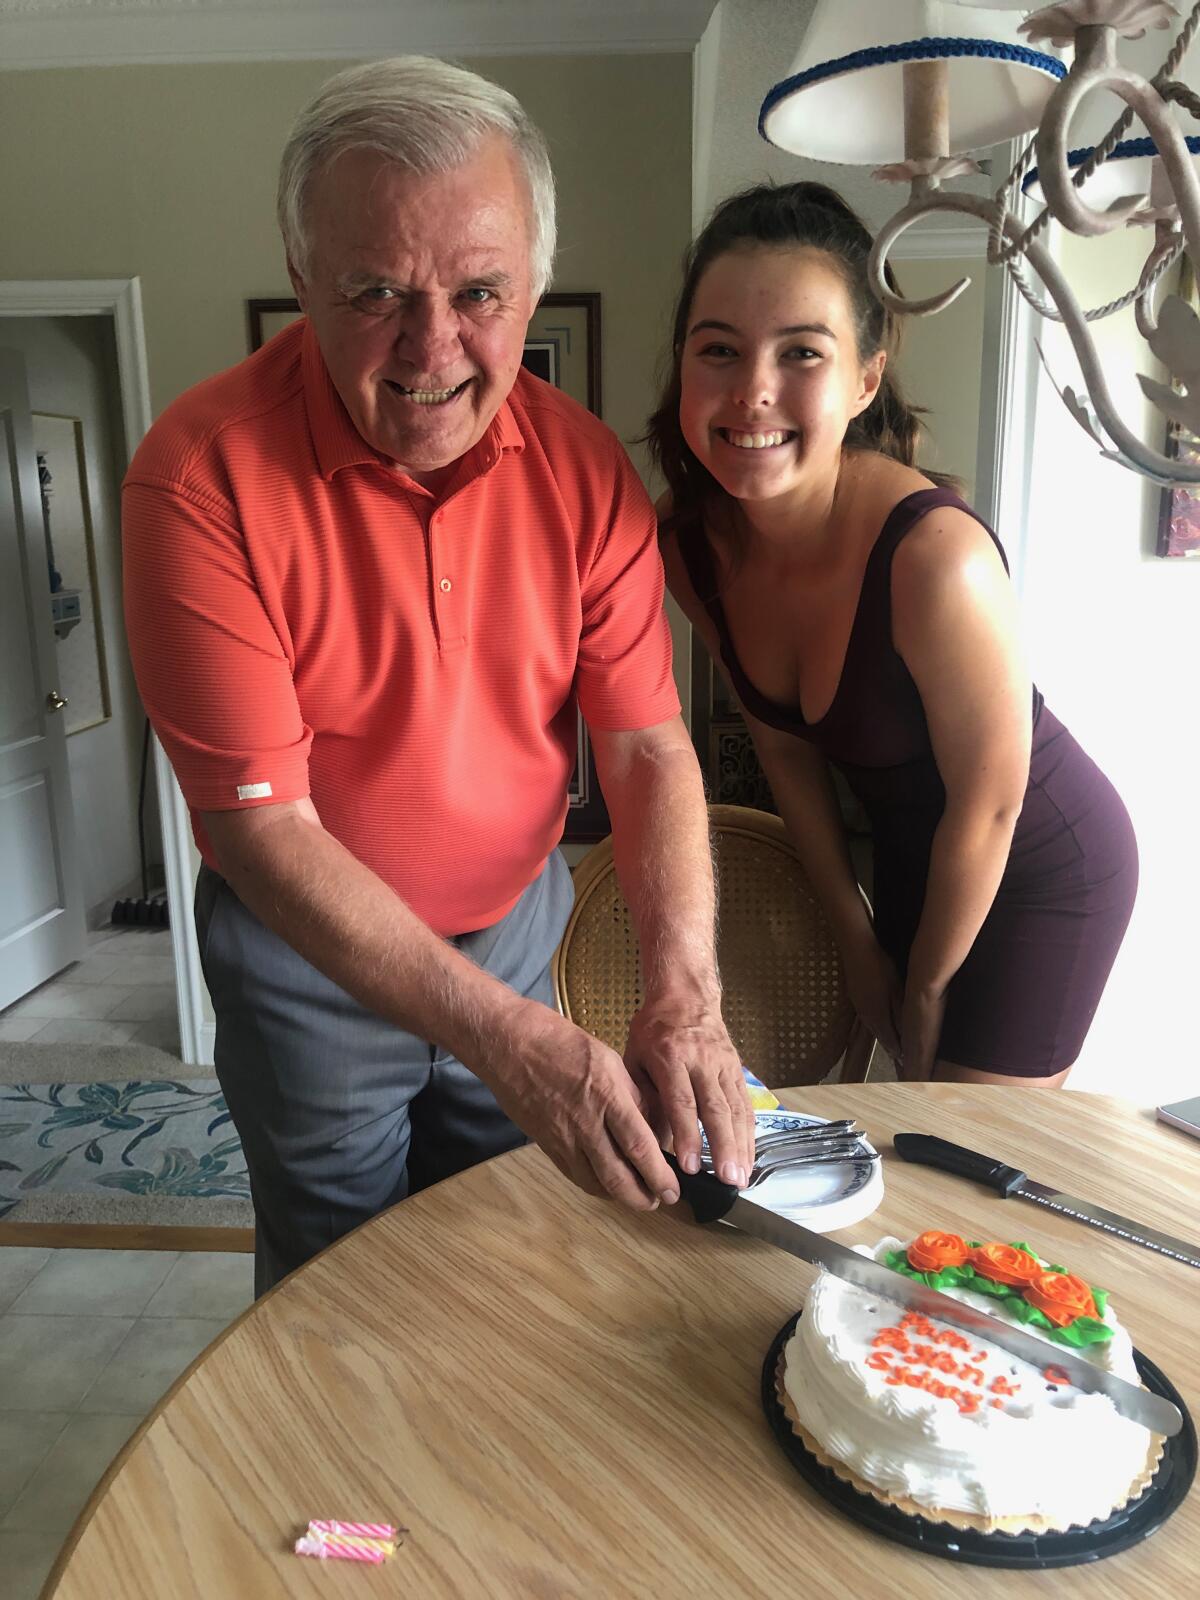 Torrey Pines junior Payton Parker, who won the school's kindness relay, spent time with her grandfather.